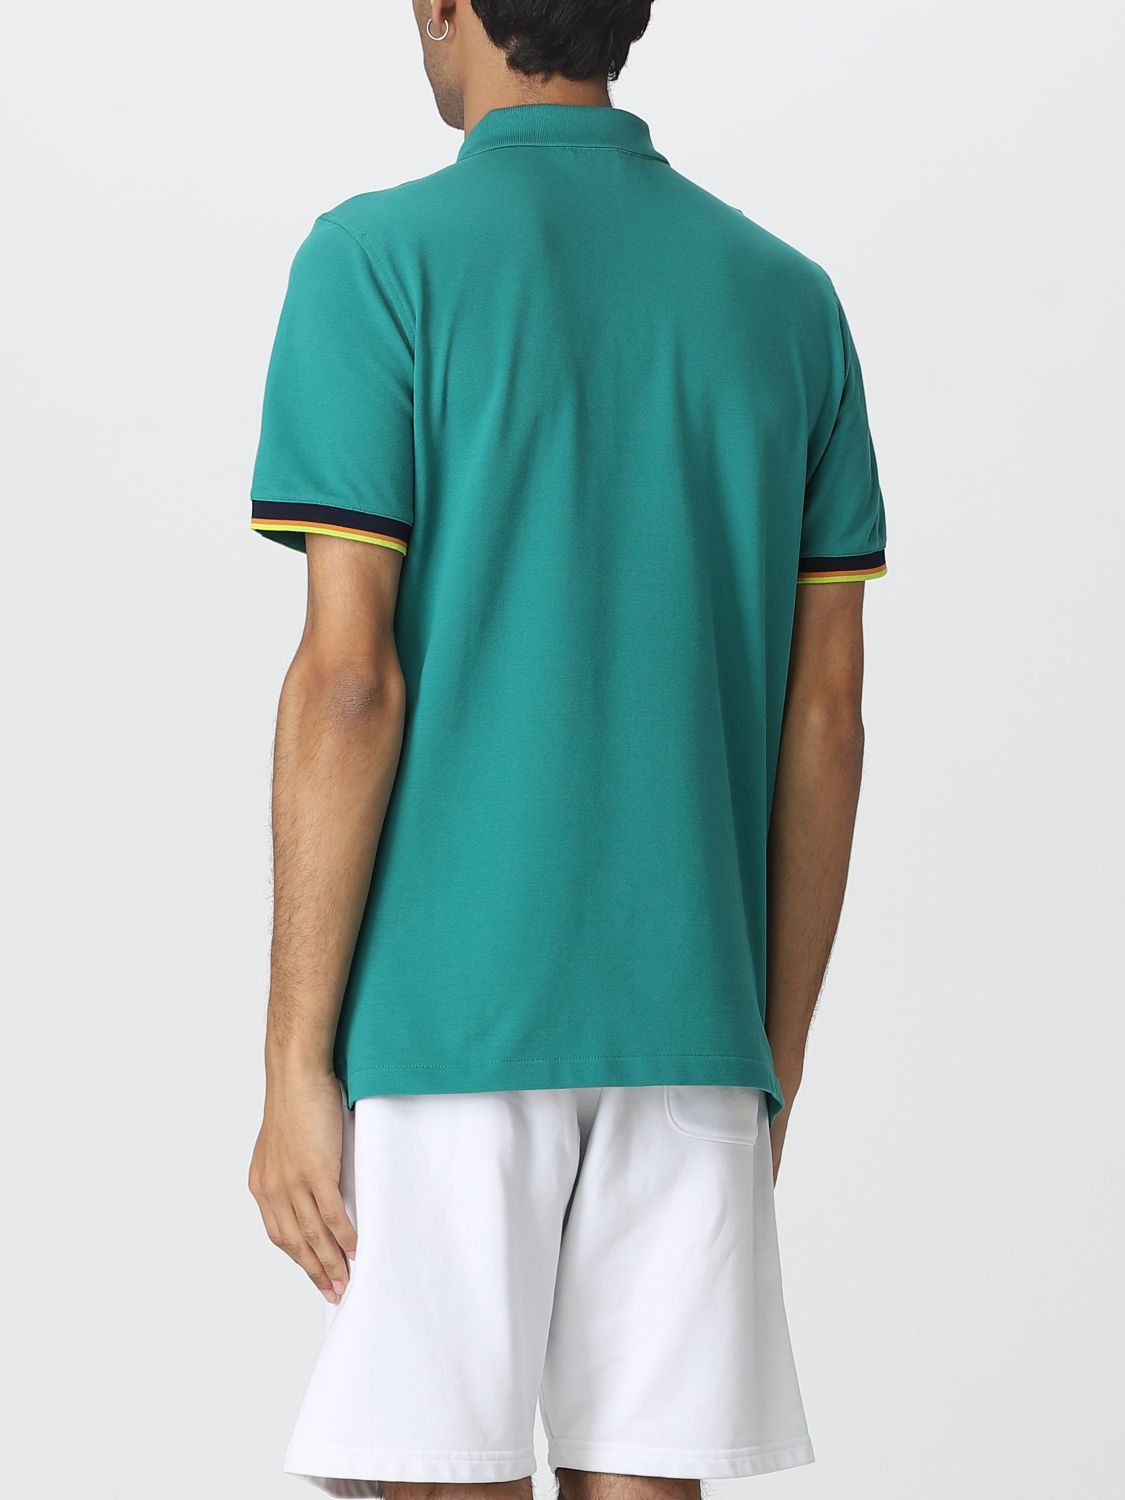 K-WAY: polo shirt for man - Green | K-Way polo shirt K7121IW online on ...